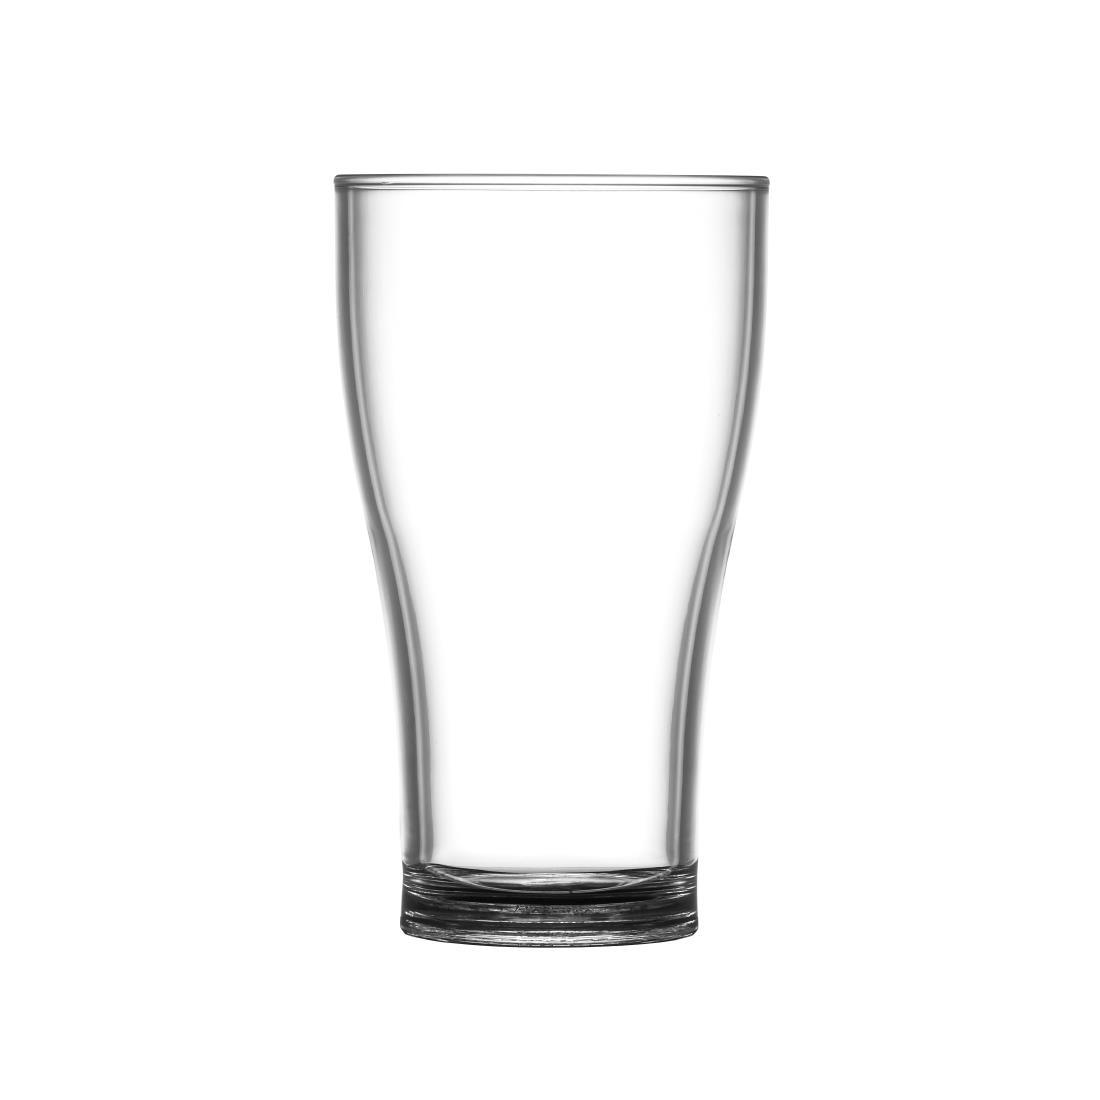 BBP Polycarbonate Nucleated Viking Pint Glasses CE Marked (Pack of 24) - DC421  - 1